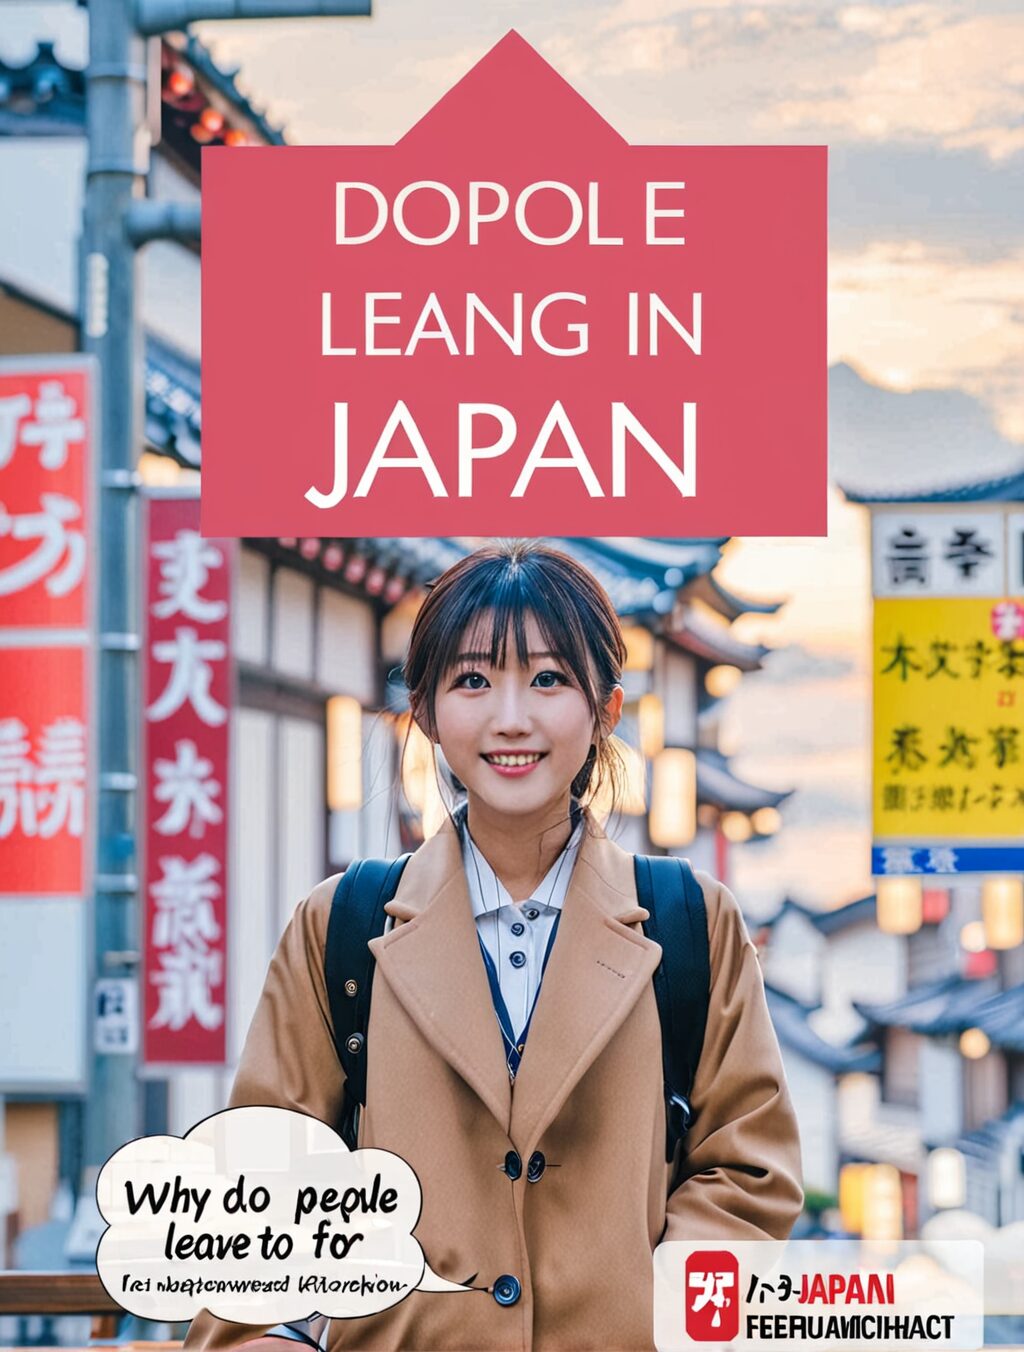 why do people leave/move to japan